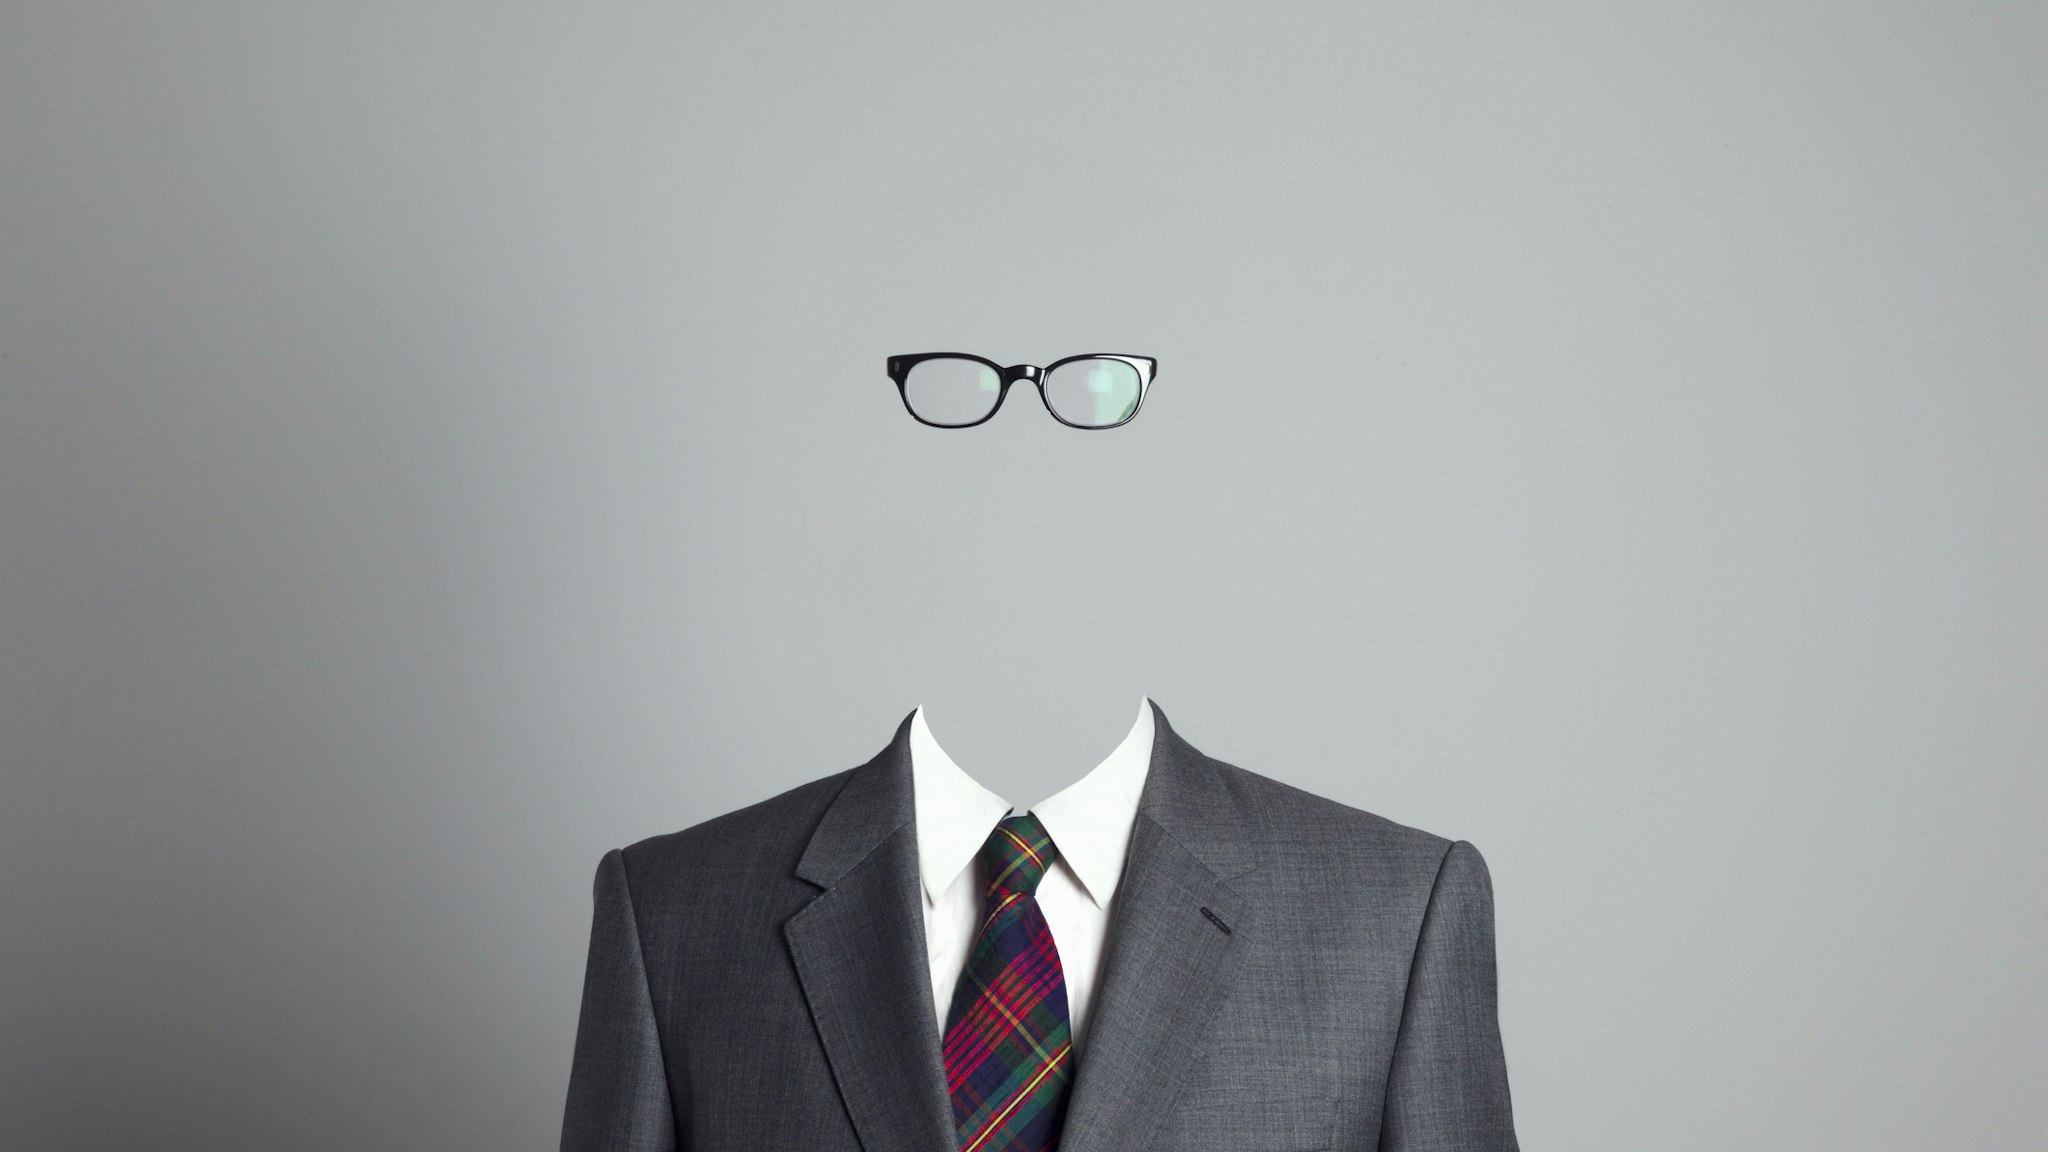 Business man with no face, looking at camera - stock photo